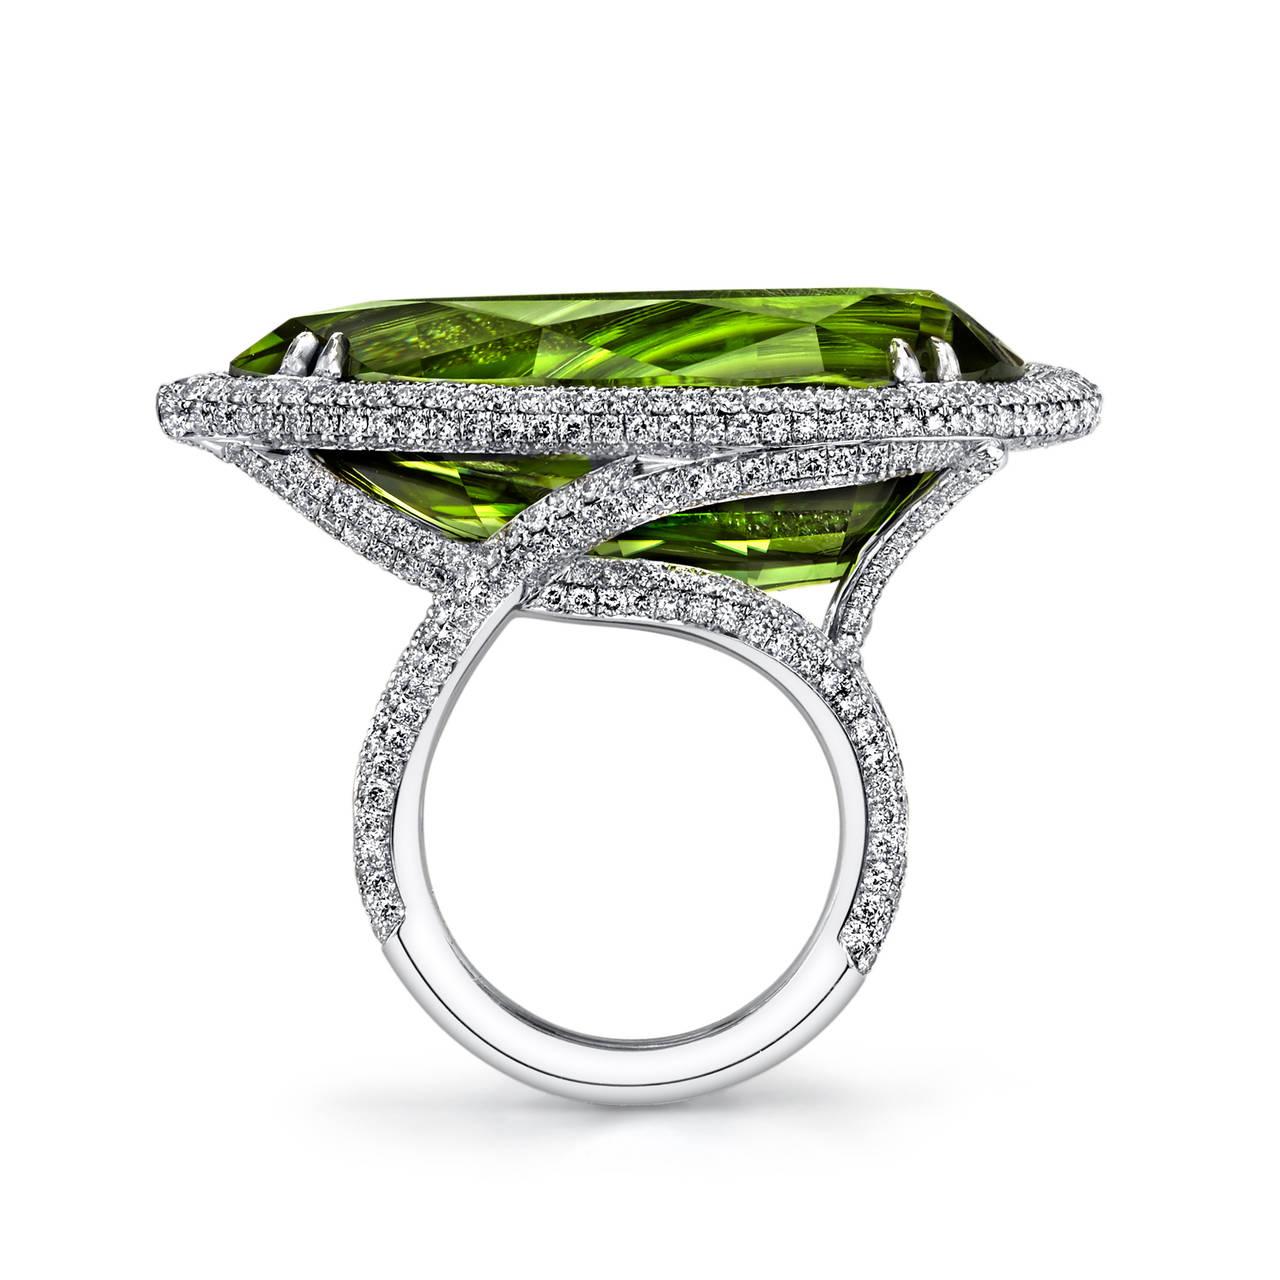 This exquisite Pear-Shaped Pakistani Peridot ring set in 18 Karat White Gold is the epitome of elegance and sophistication. Accented with Micro Pave Ideal Cut White Diamonds, the ring boasts a GIA Certified Center Stone with a total weight of